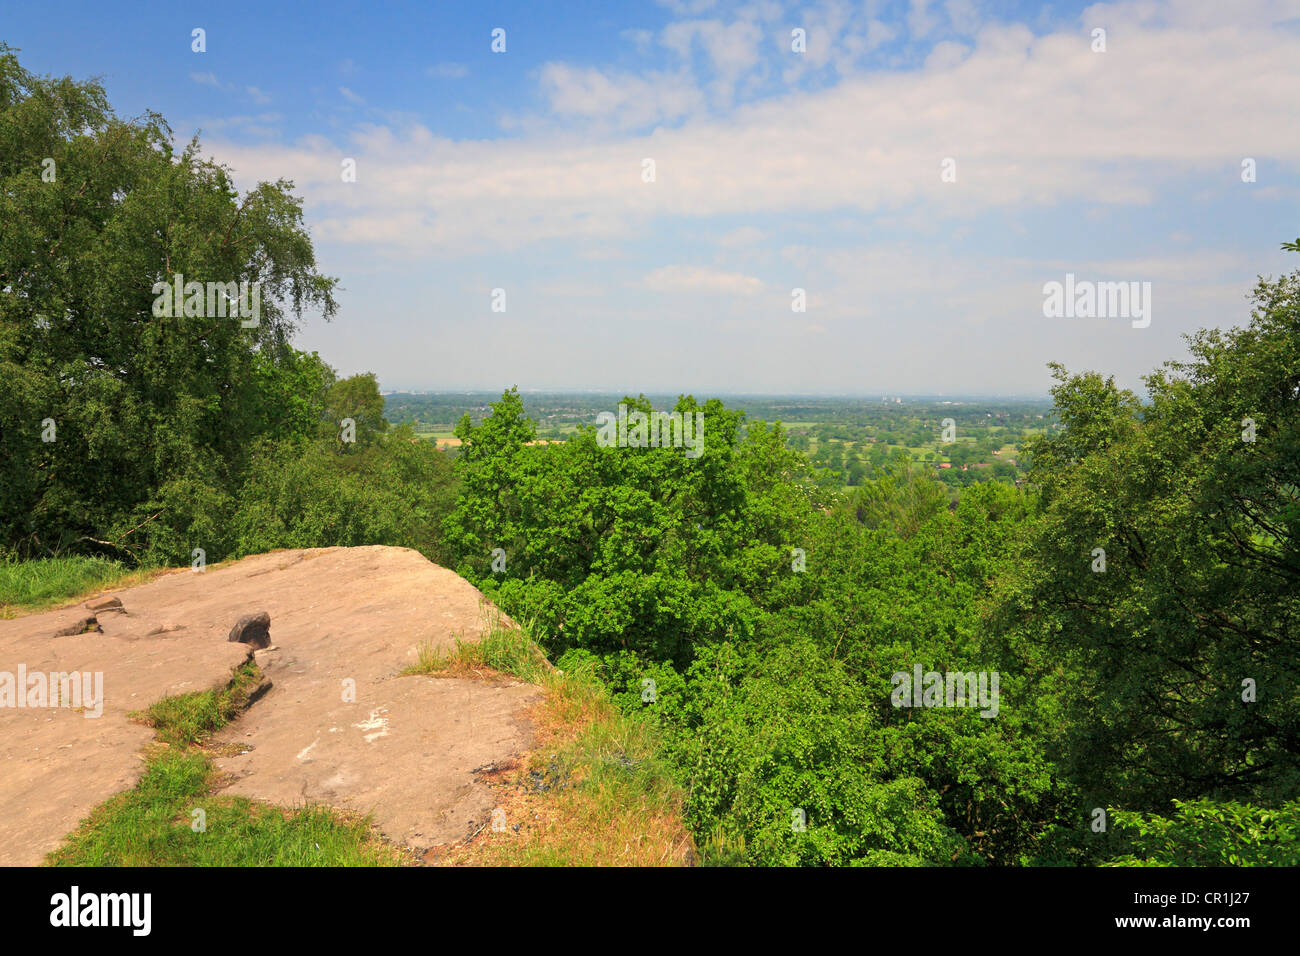 Looking across the Cheshire Plain from Castle Rock on Alderley Edge, Cheshire, England, UK. Stock Photo